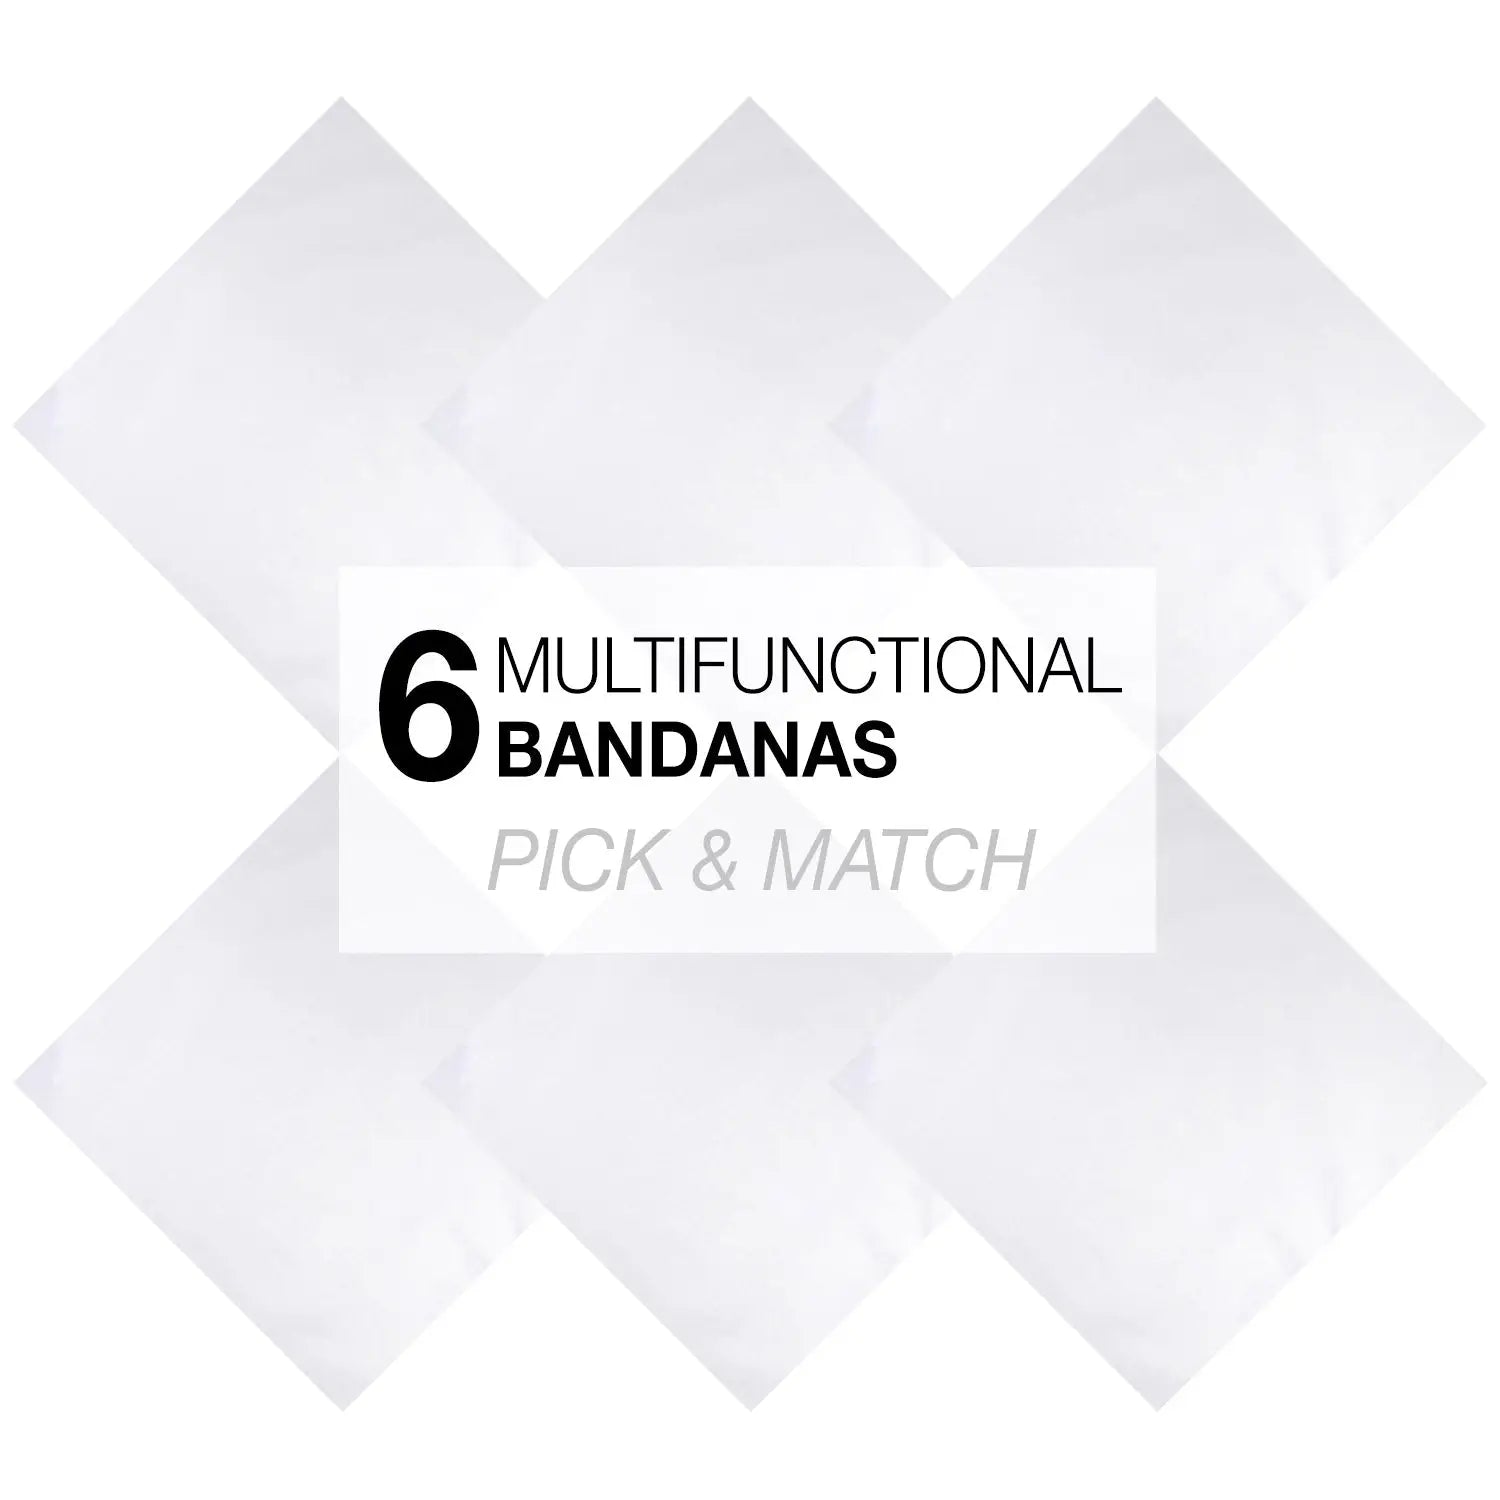 Logo for the 6 Functionals Pick and Match on Plain Cotton Bandana Set